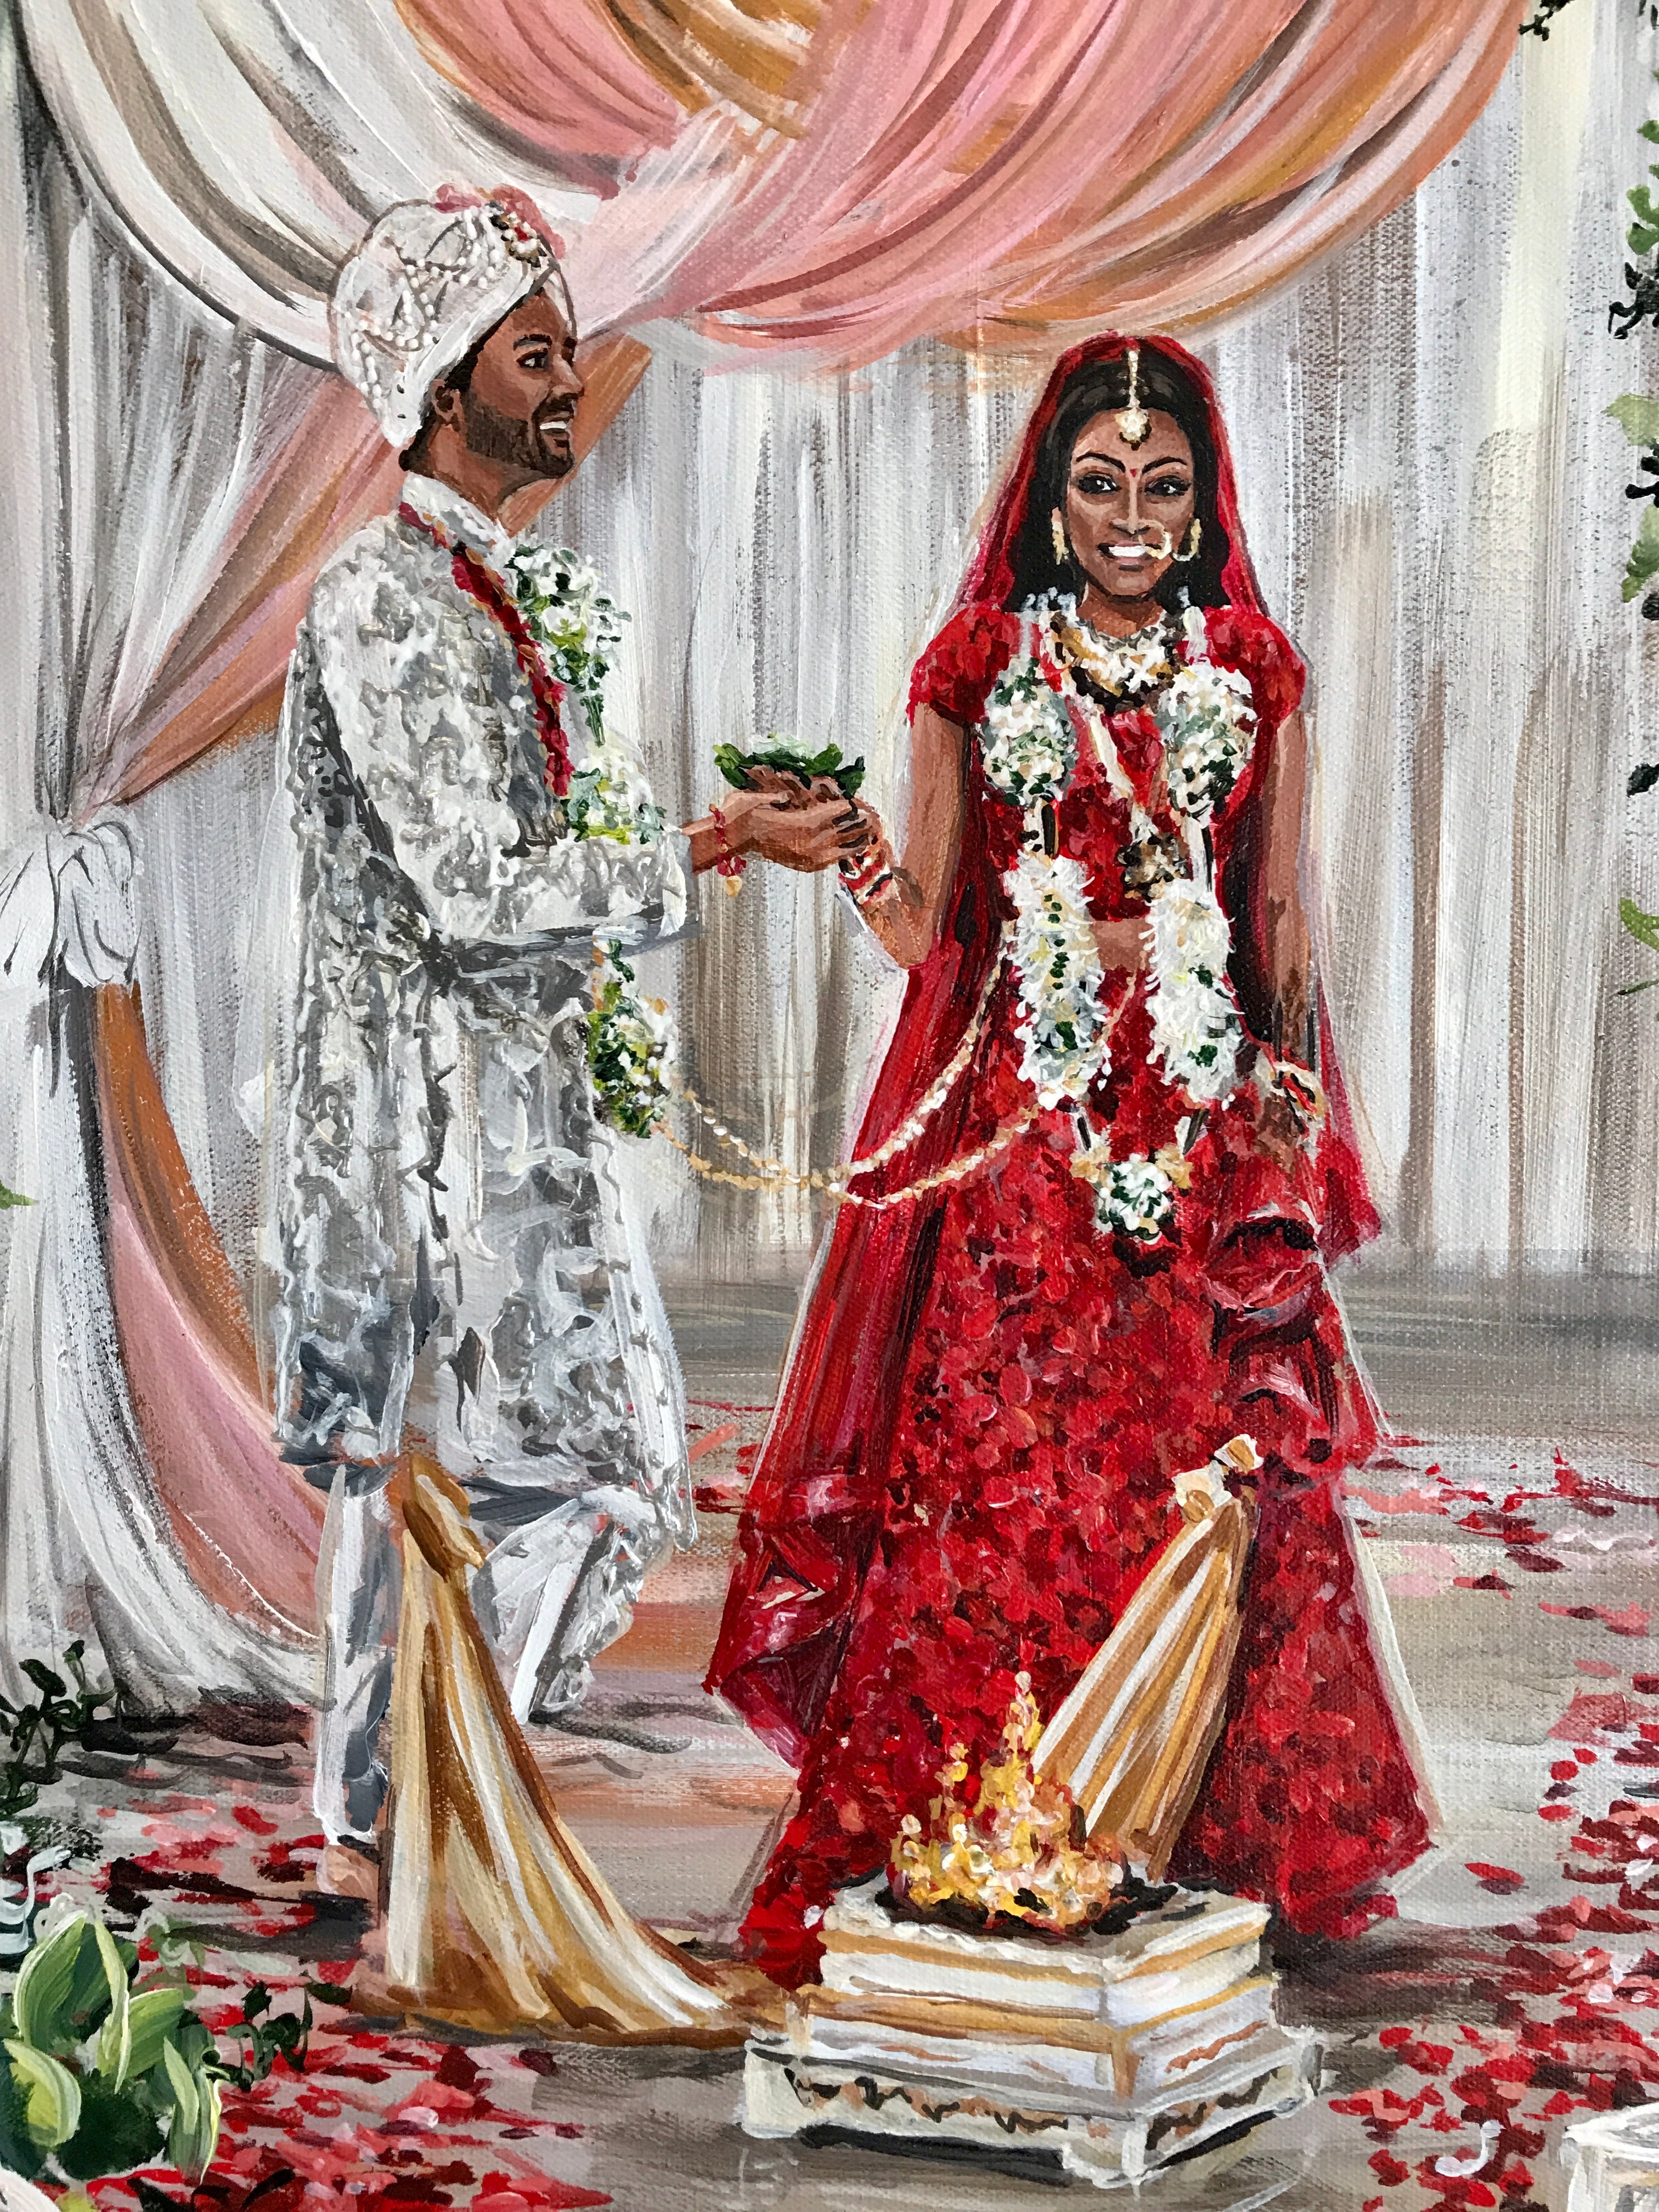 Significance of the wedding bridal veil | Times of India